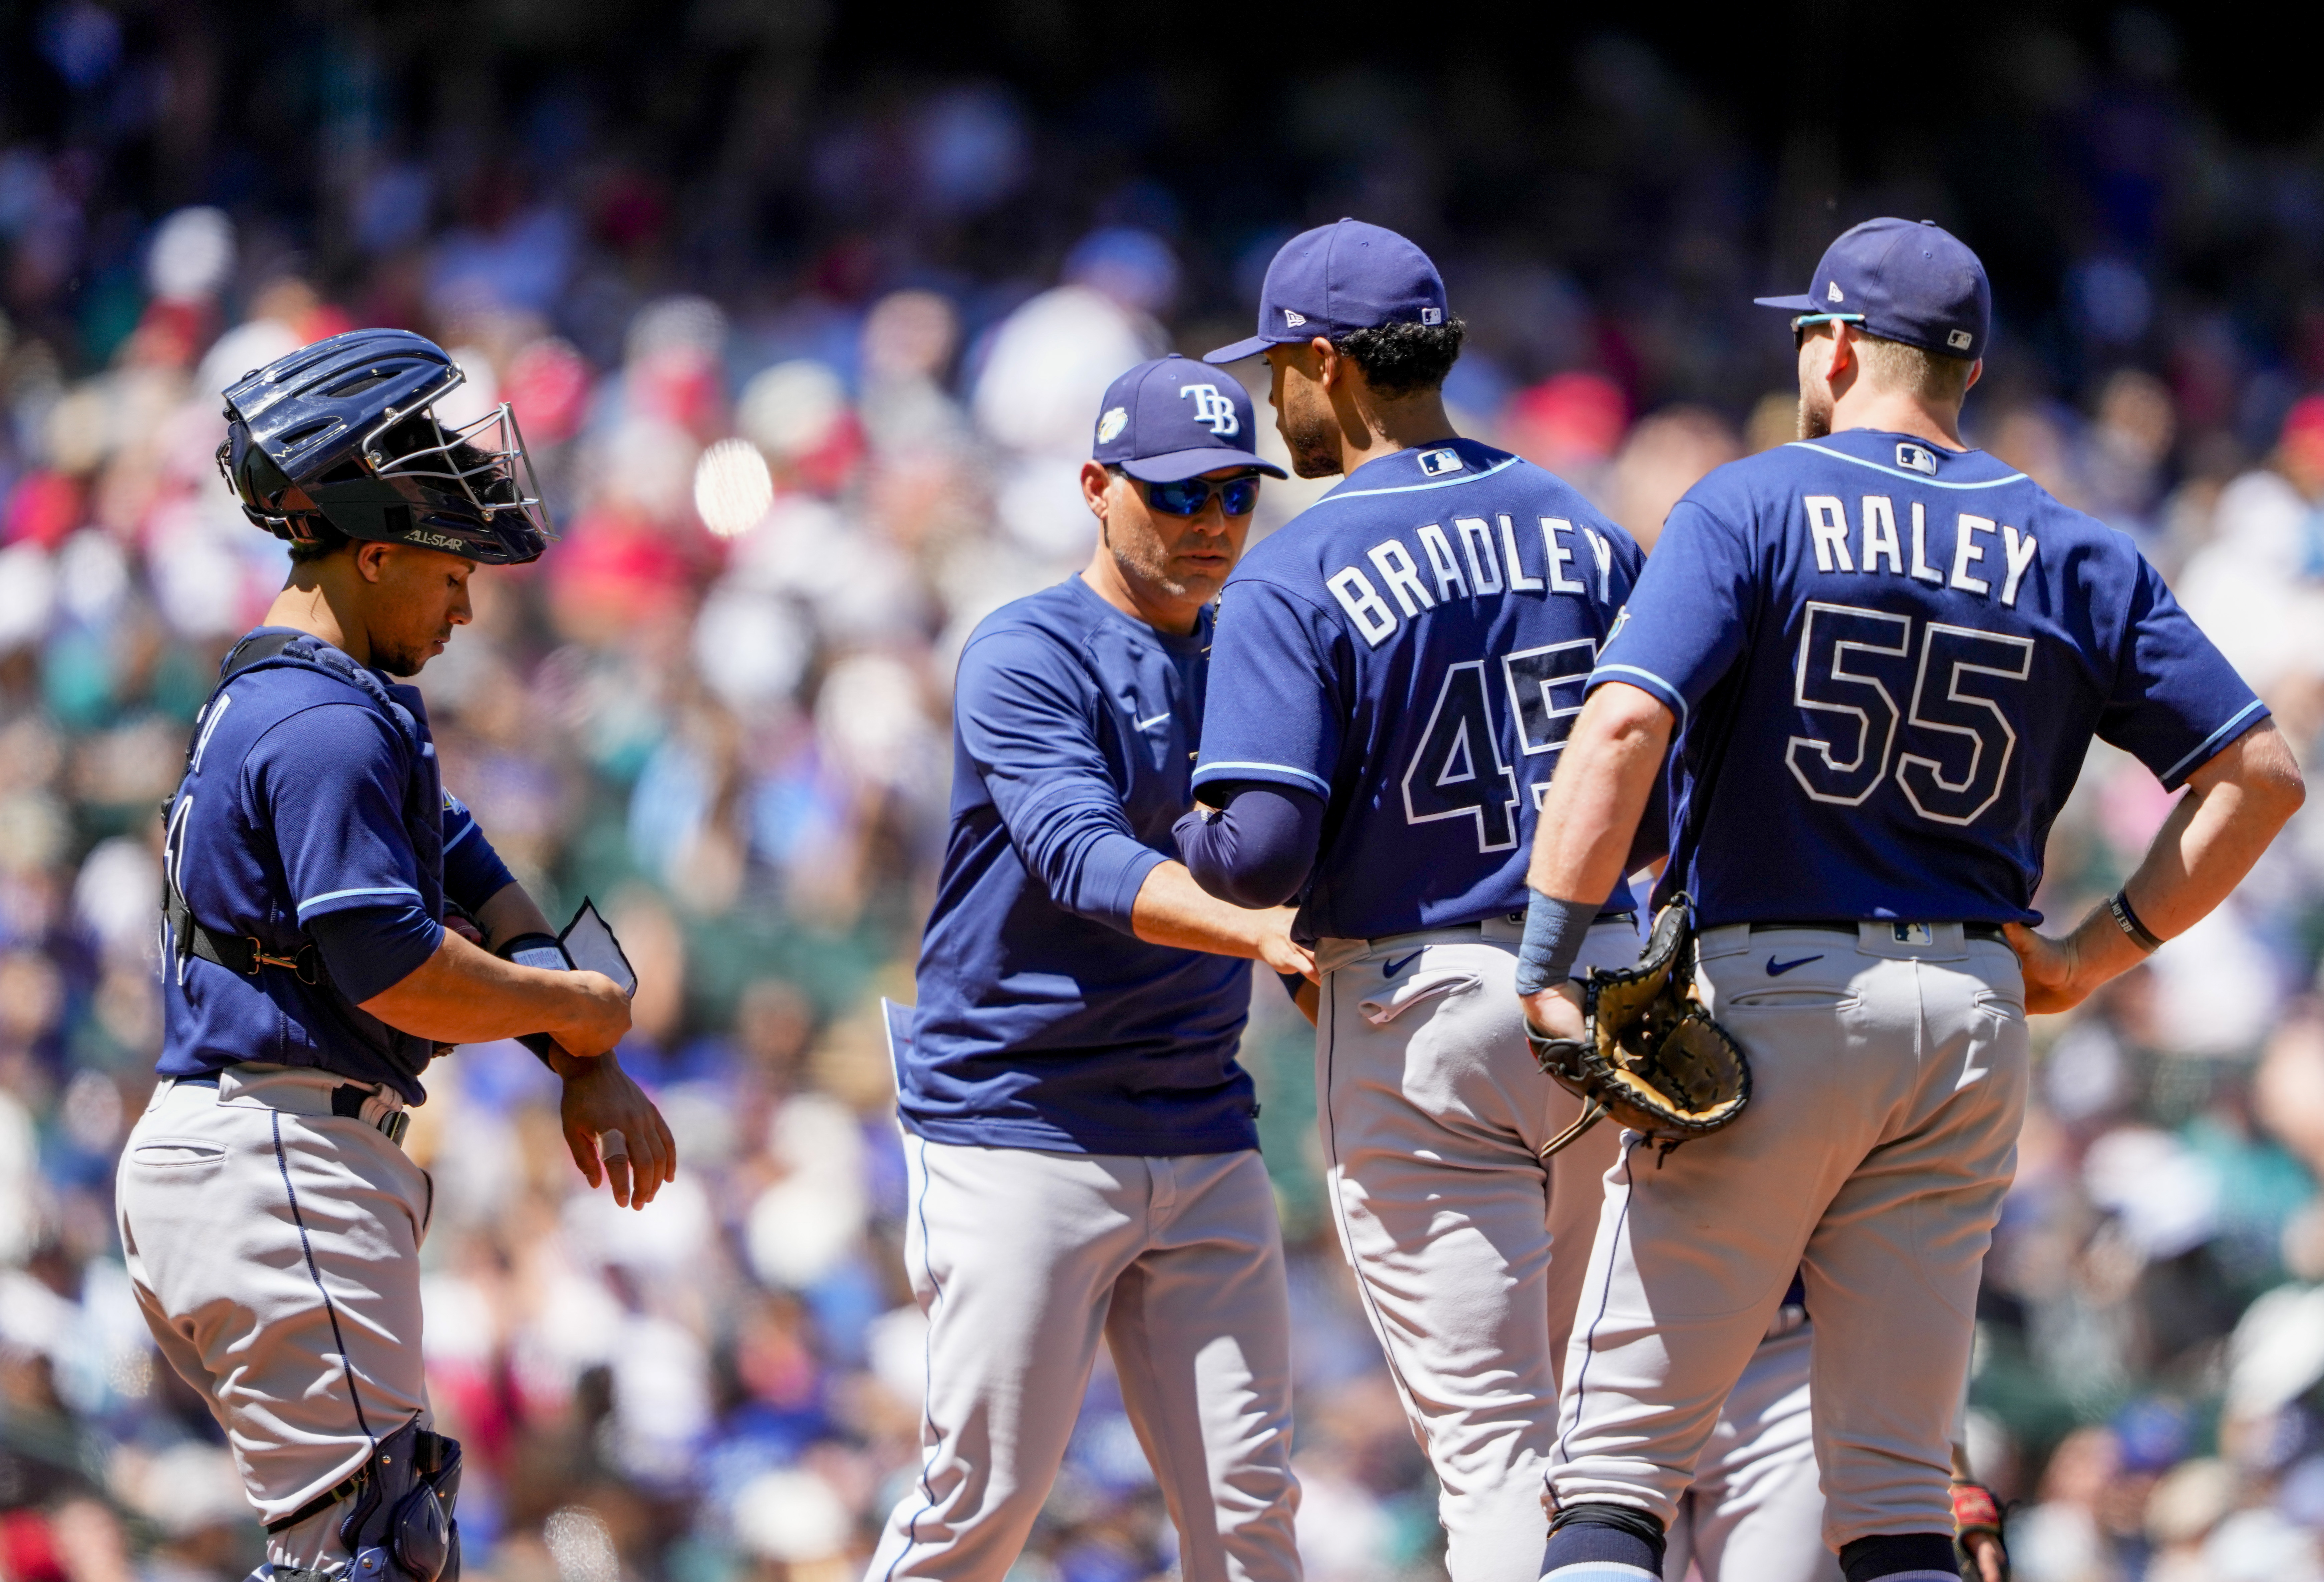 Scary Collision in Tampa Bay Rays and Seattle Mariners Game